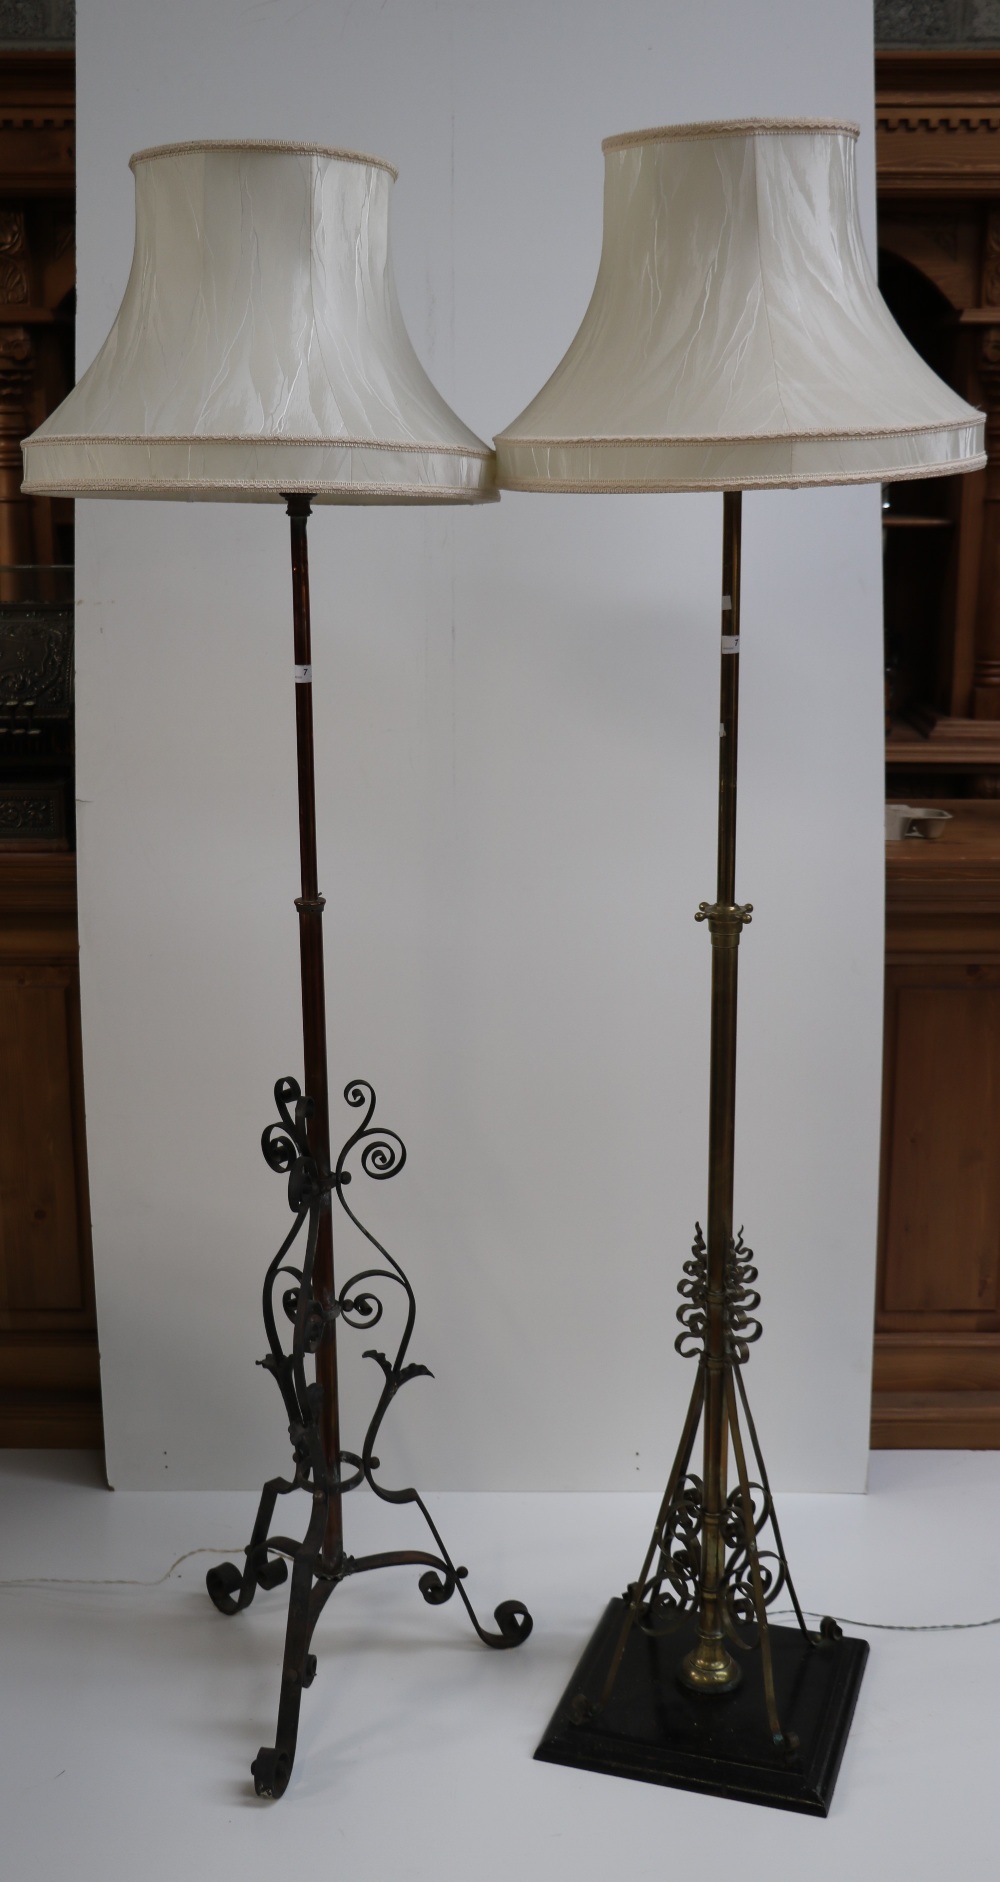 Two similar brass lamp Standards, with decoration in steel design, with cream shades.